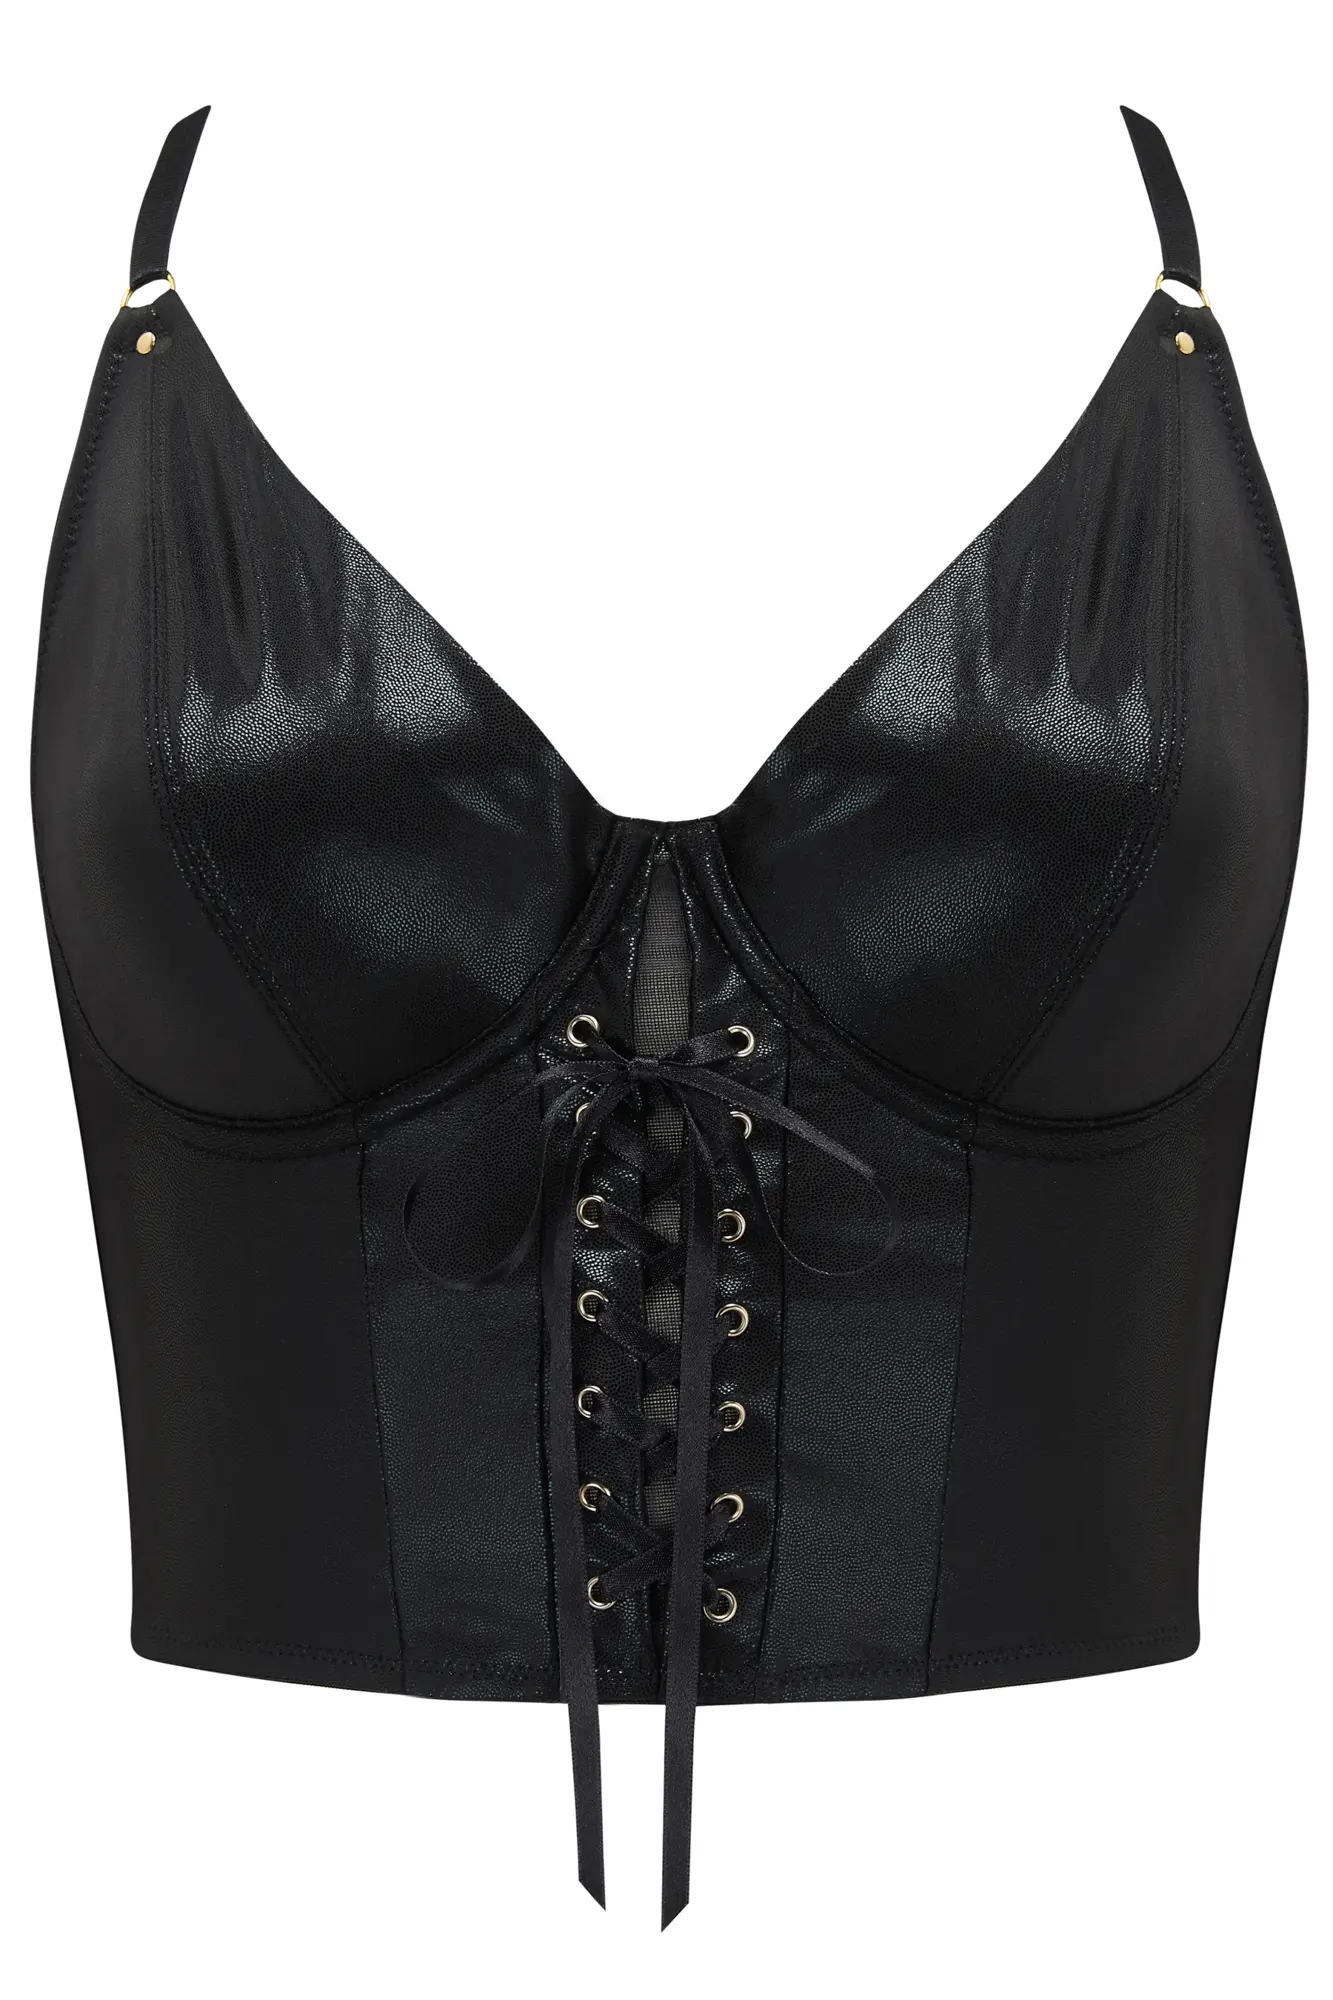 Scandalous Underwired Bustier | Black | Pour Moi Clothing